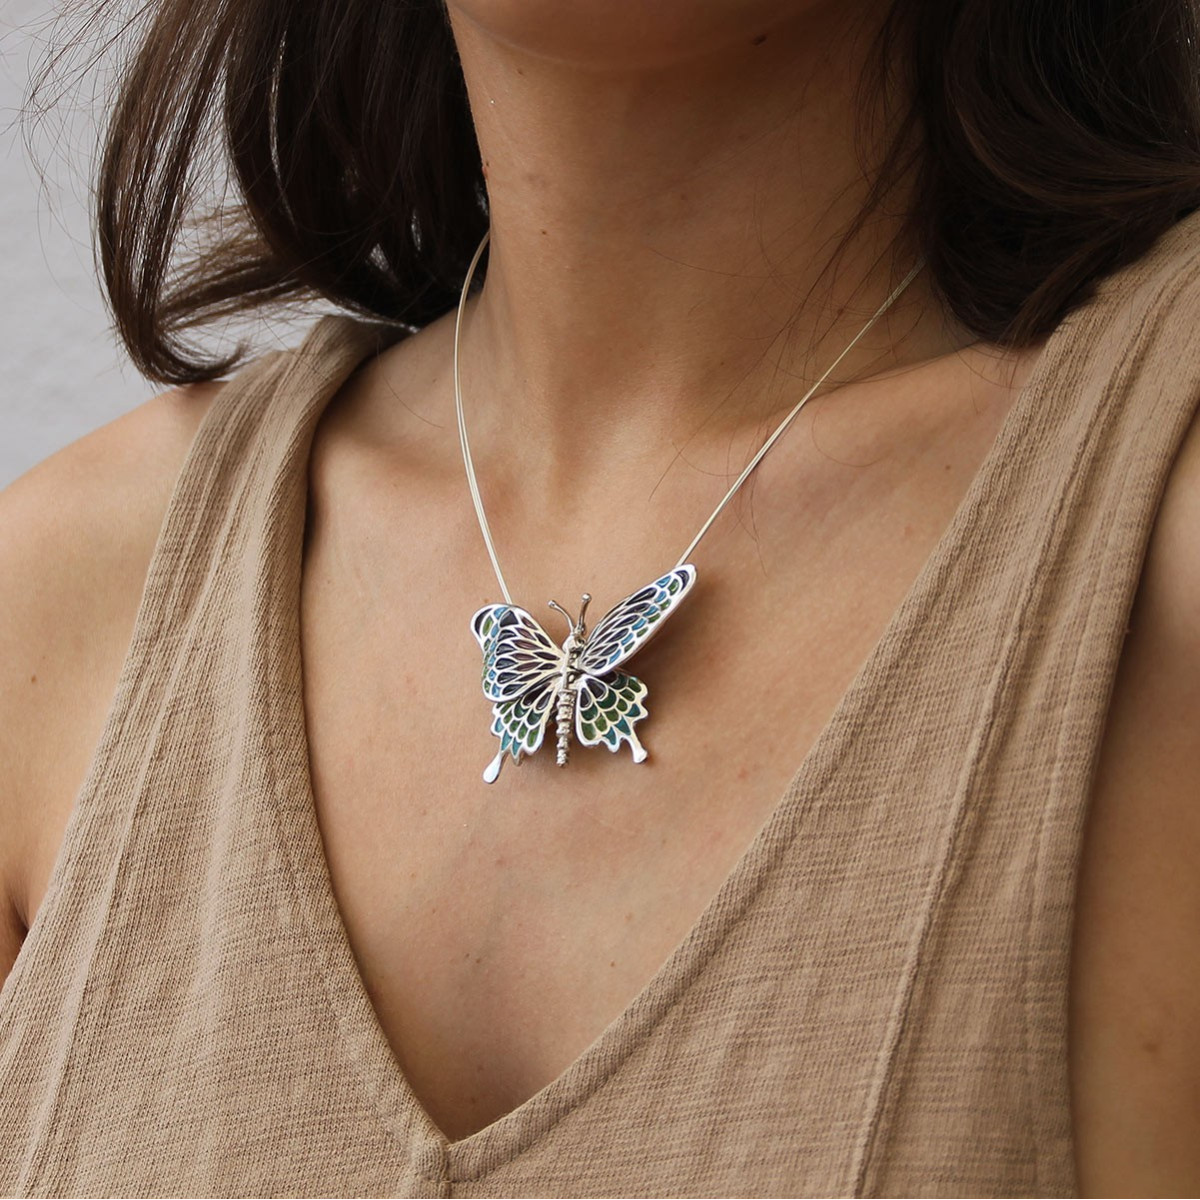 PAPALLONA - P0322-1 - SILVER AND ENAMEL BUTTERFLY PENDANT P0322-1